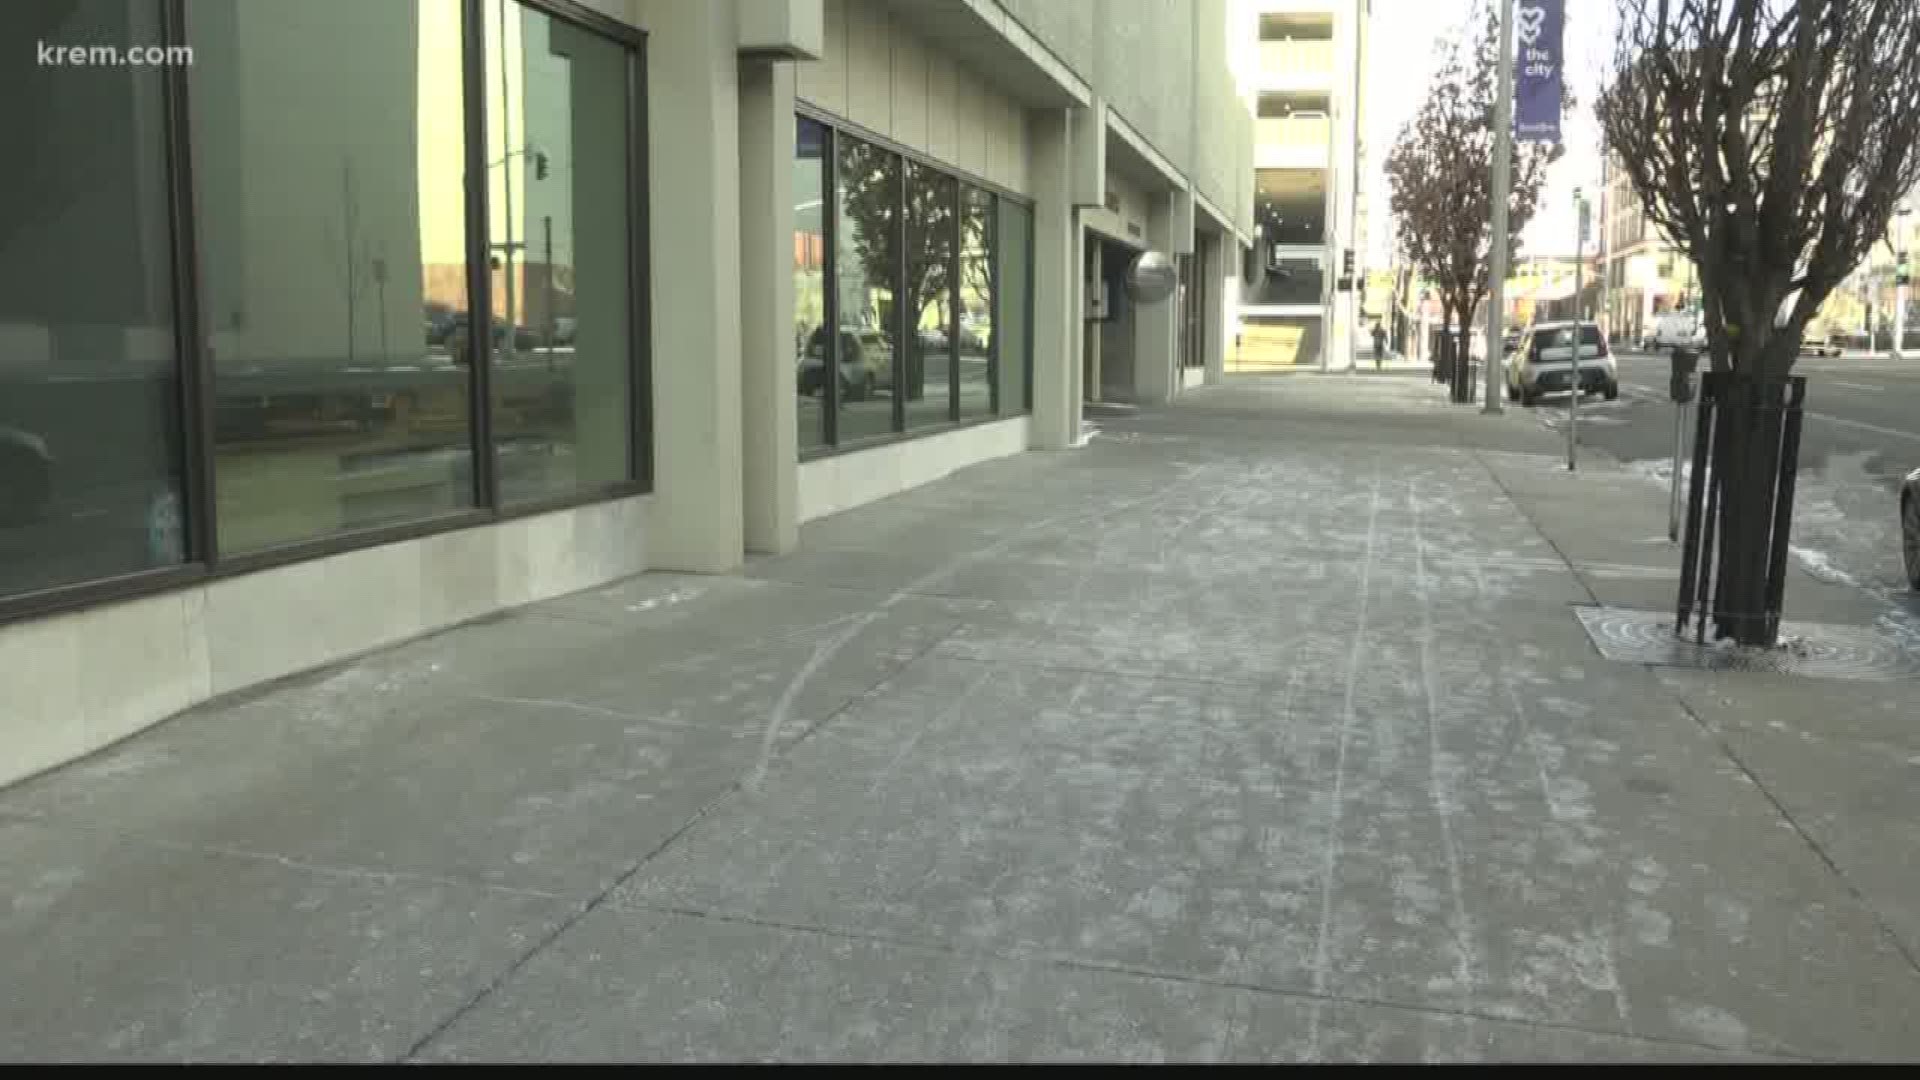 In response to the death of a dog who was electrocuted by stray voltage from a heated sidewalk, the Spokane City Council has passed an ordinance meant to prevent similar incidents in the future.